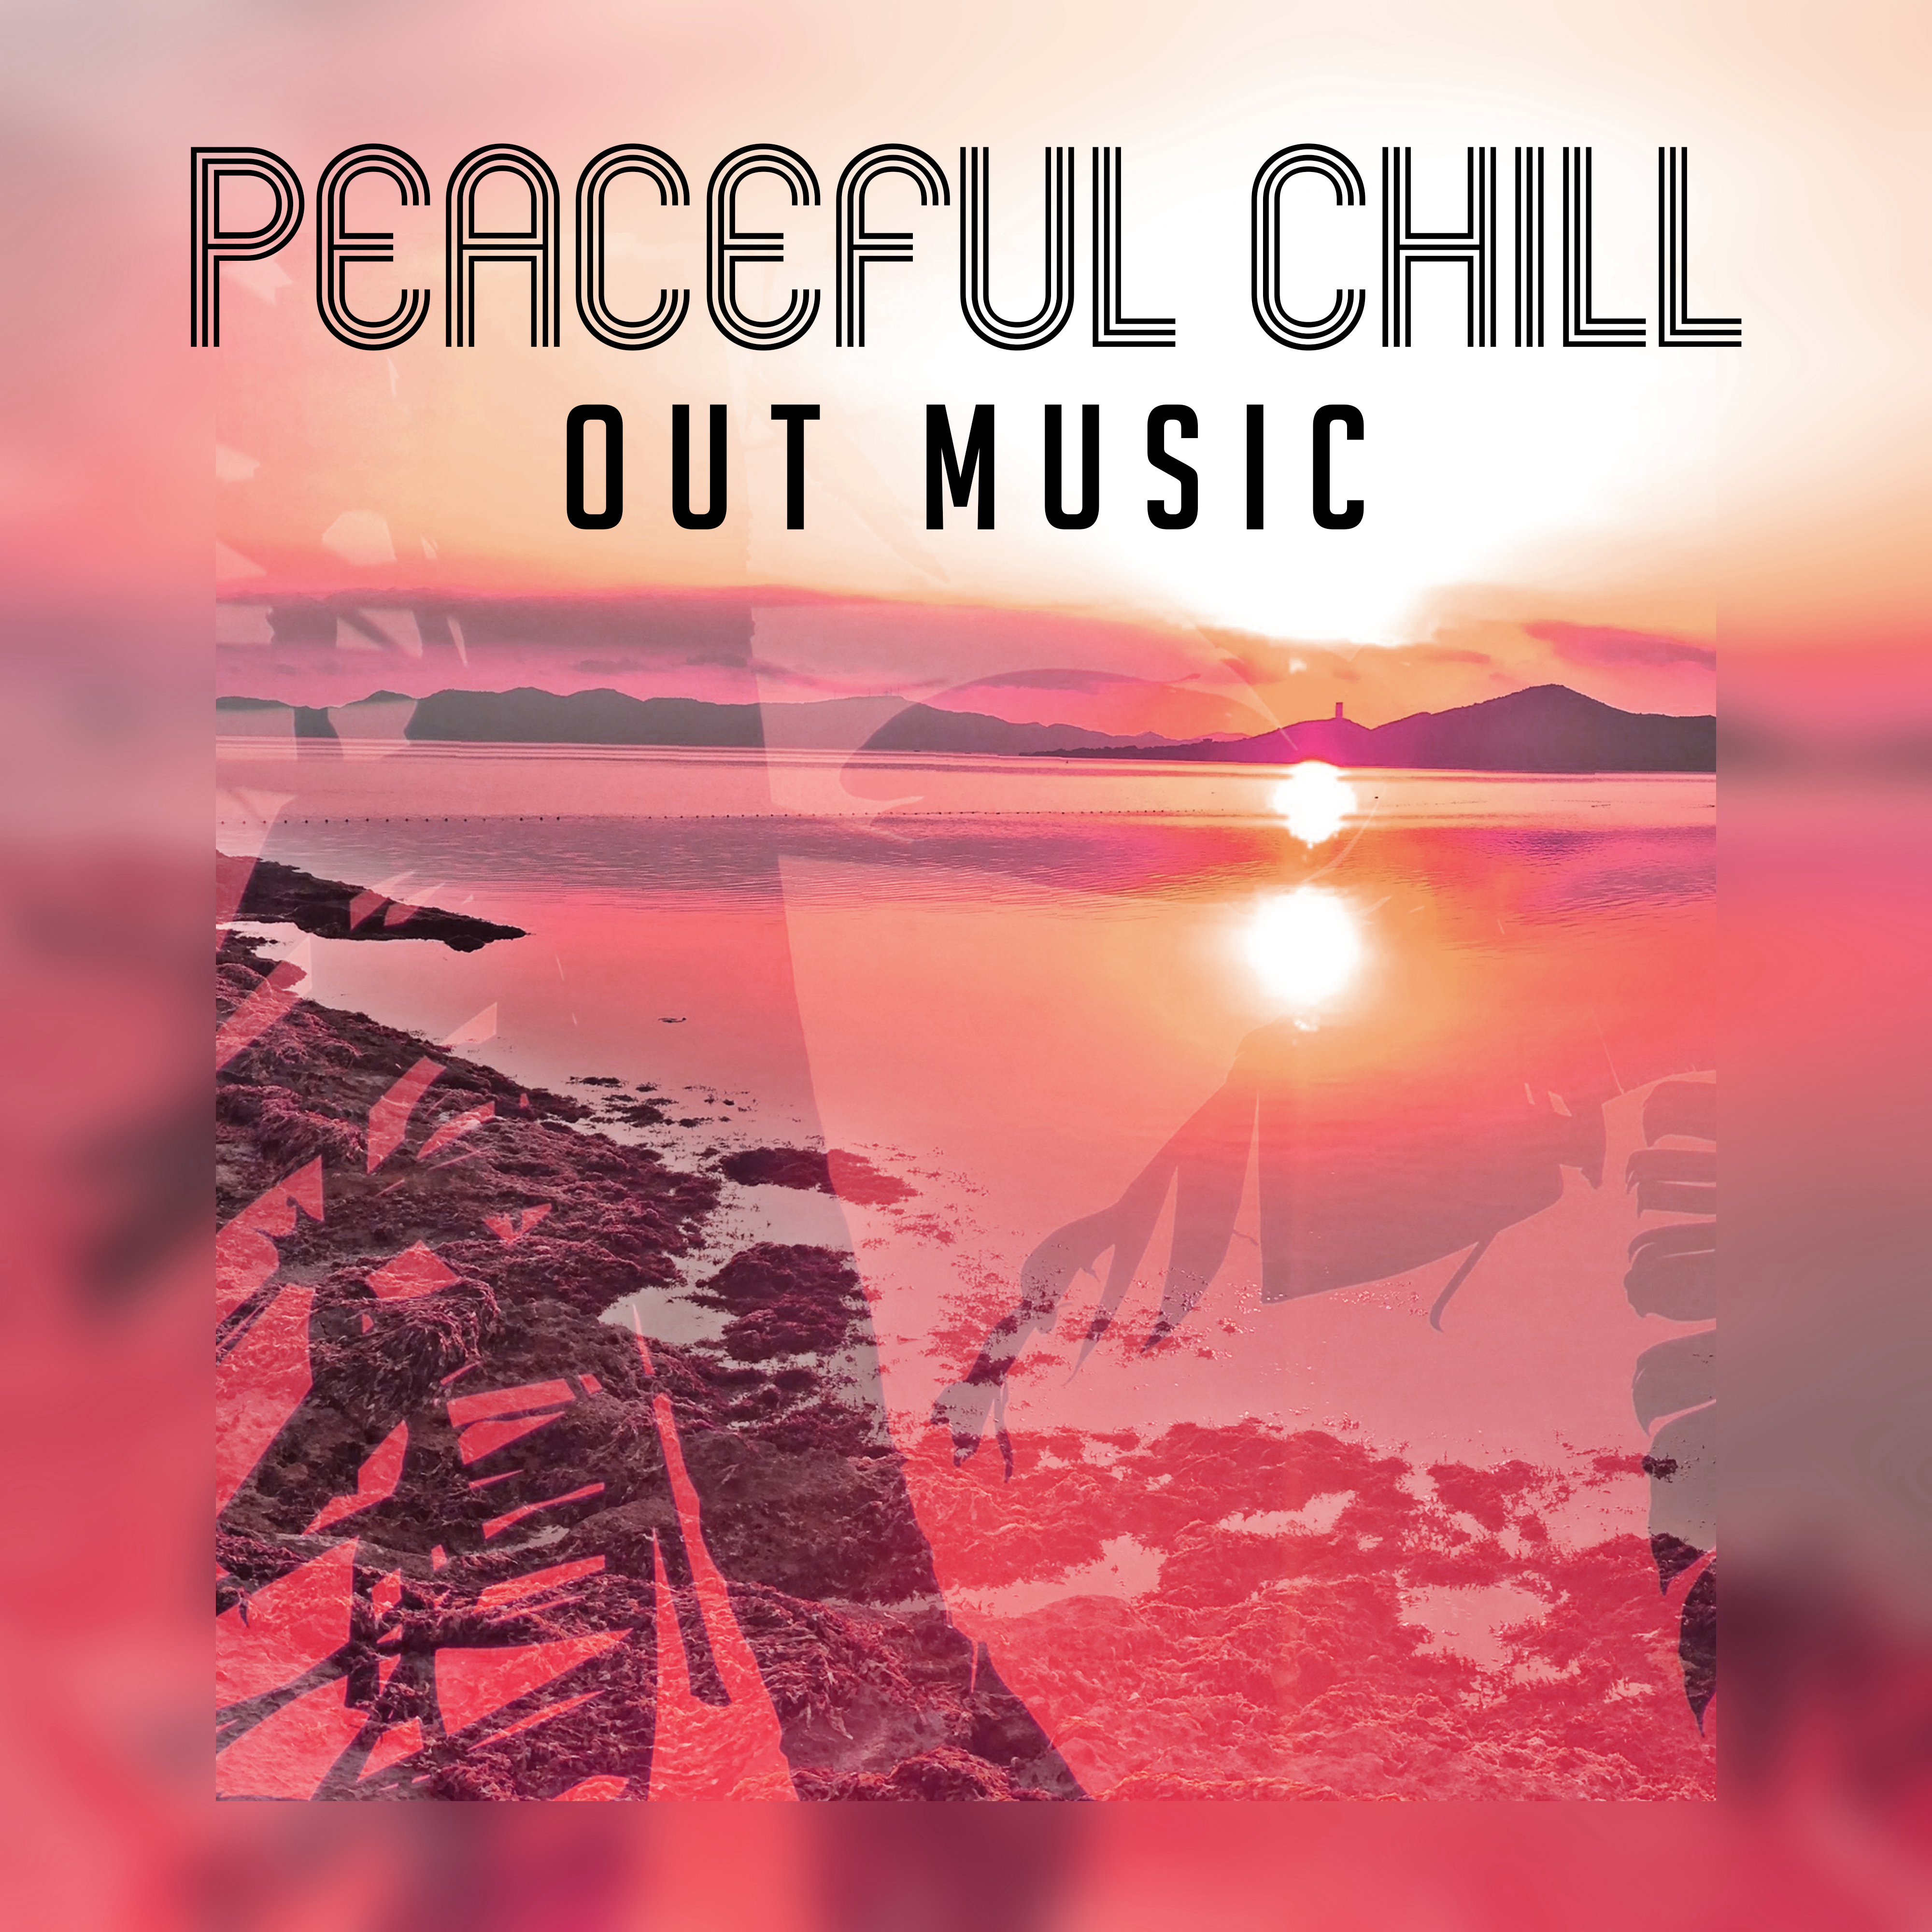 Peaceful Chill Out Music  Calming Chill Songs, Beach House Lounge, Electronic Vibes, Summer Rest